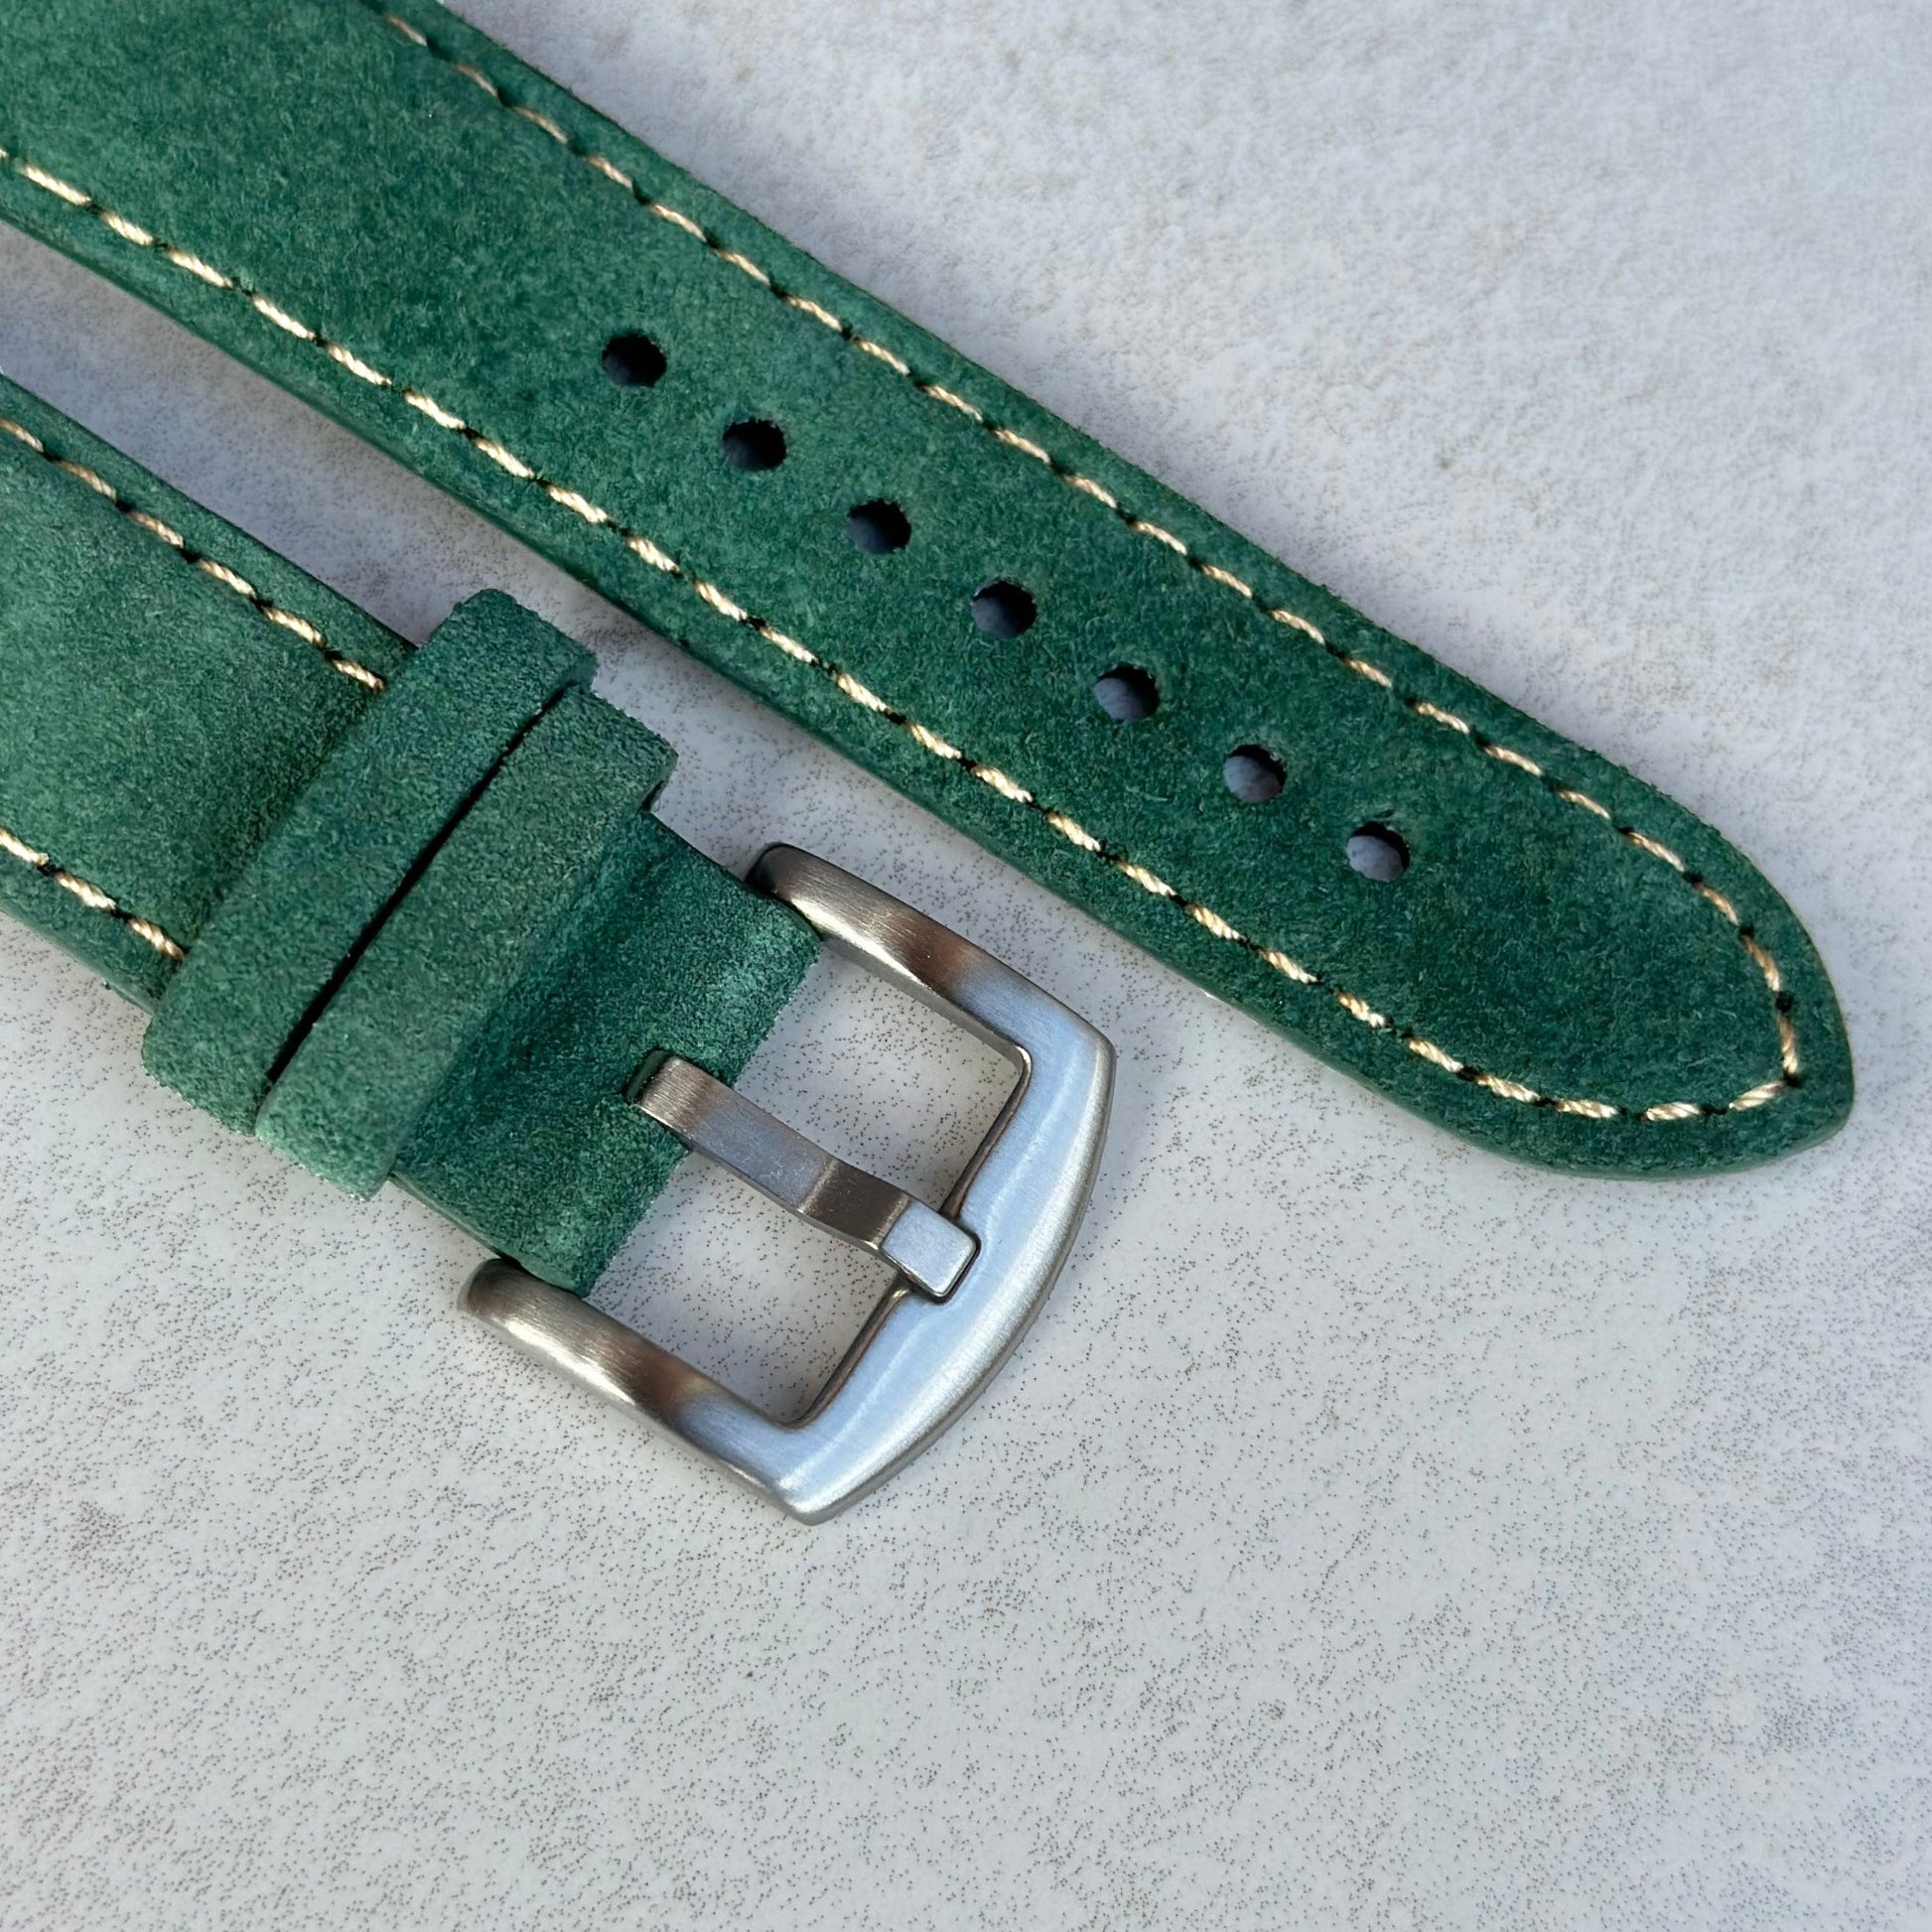 Brushed 316L stainless steel buckle on the Paris hunter green suede watch strap. Watch And Strap